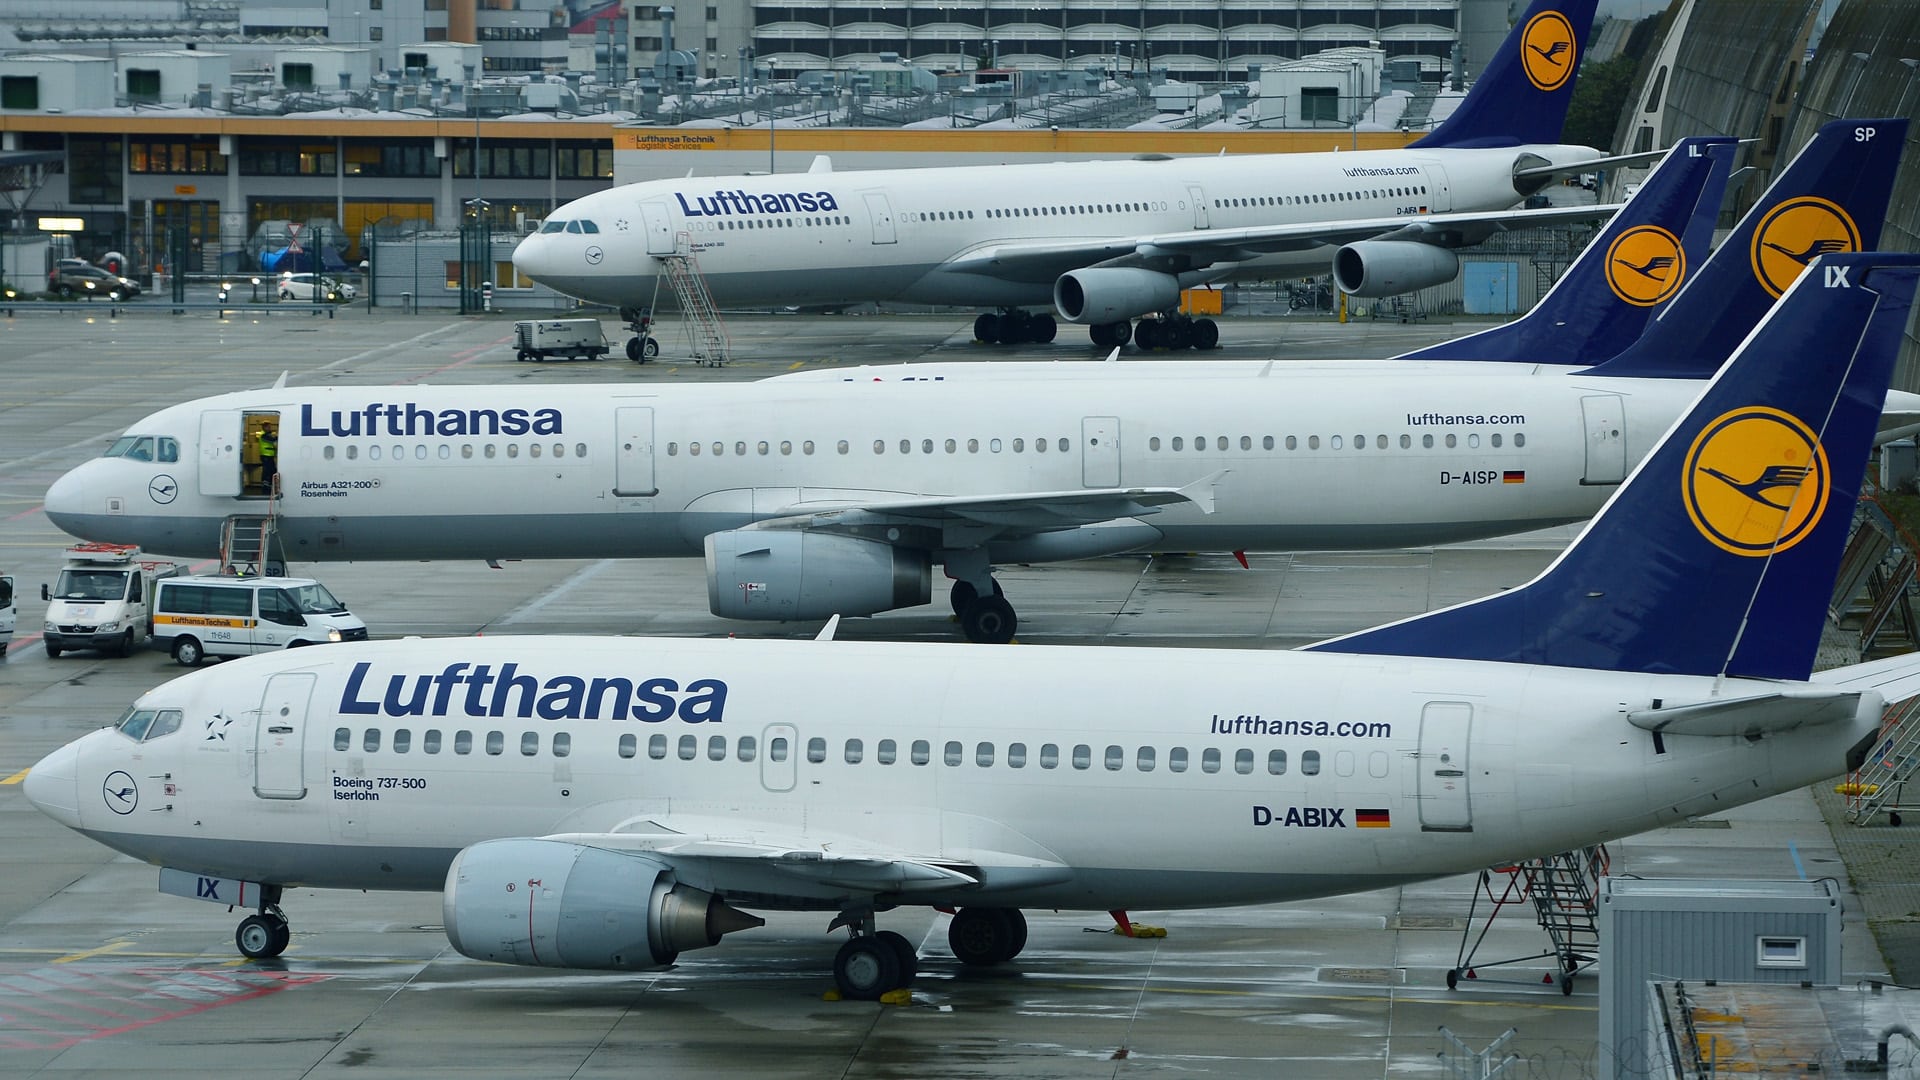 Restricting air traffic between India and Germany hurting both economies